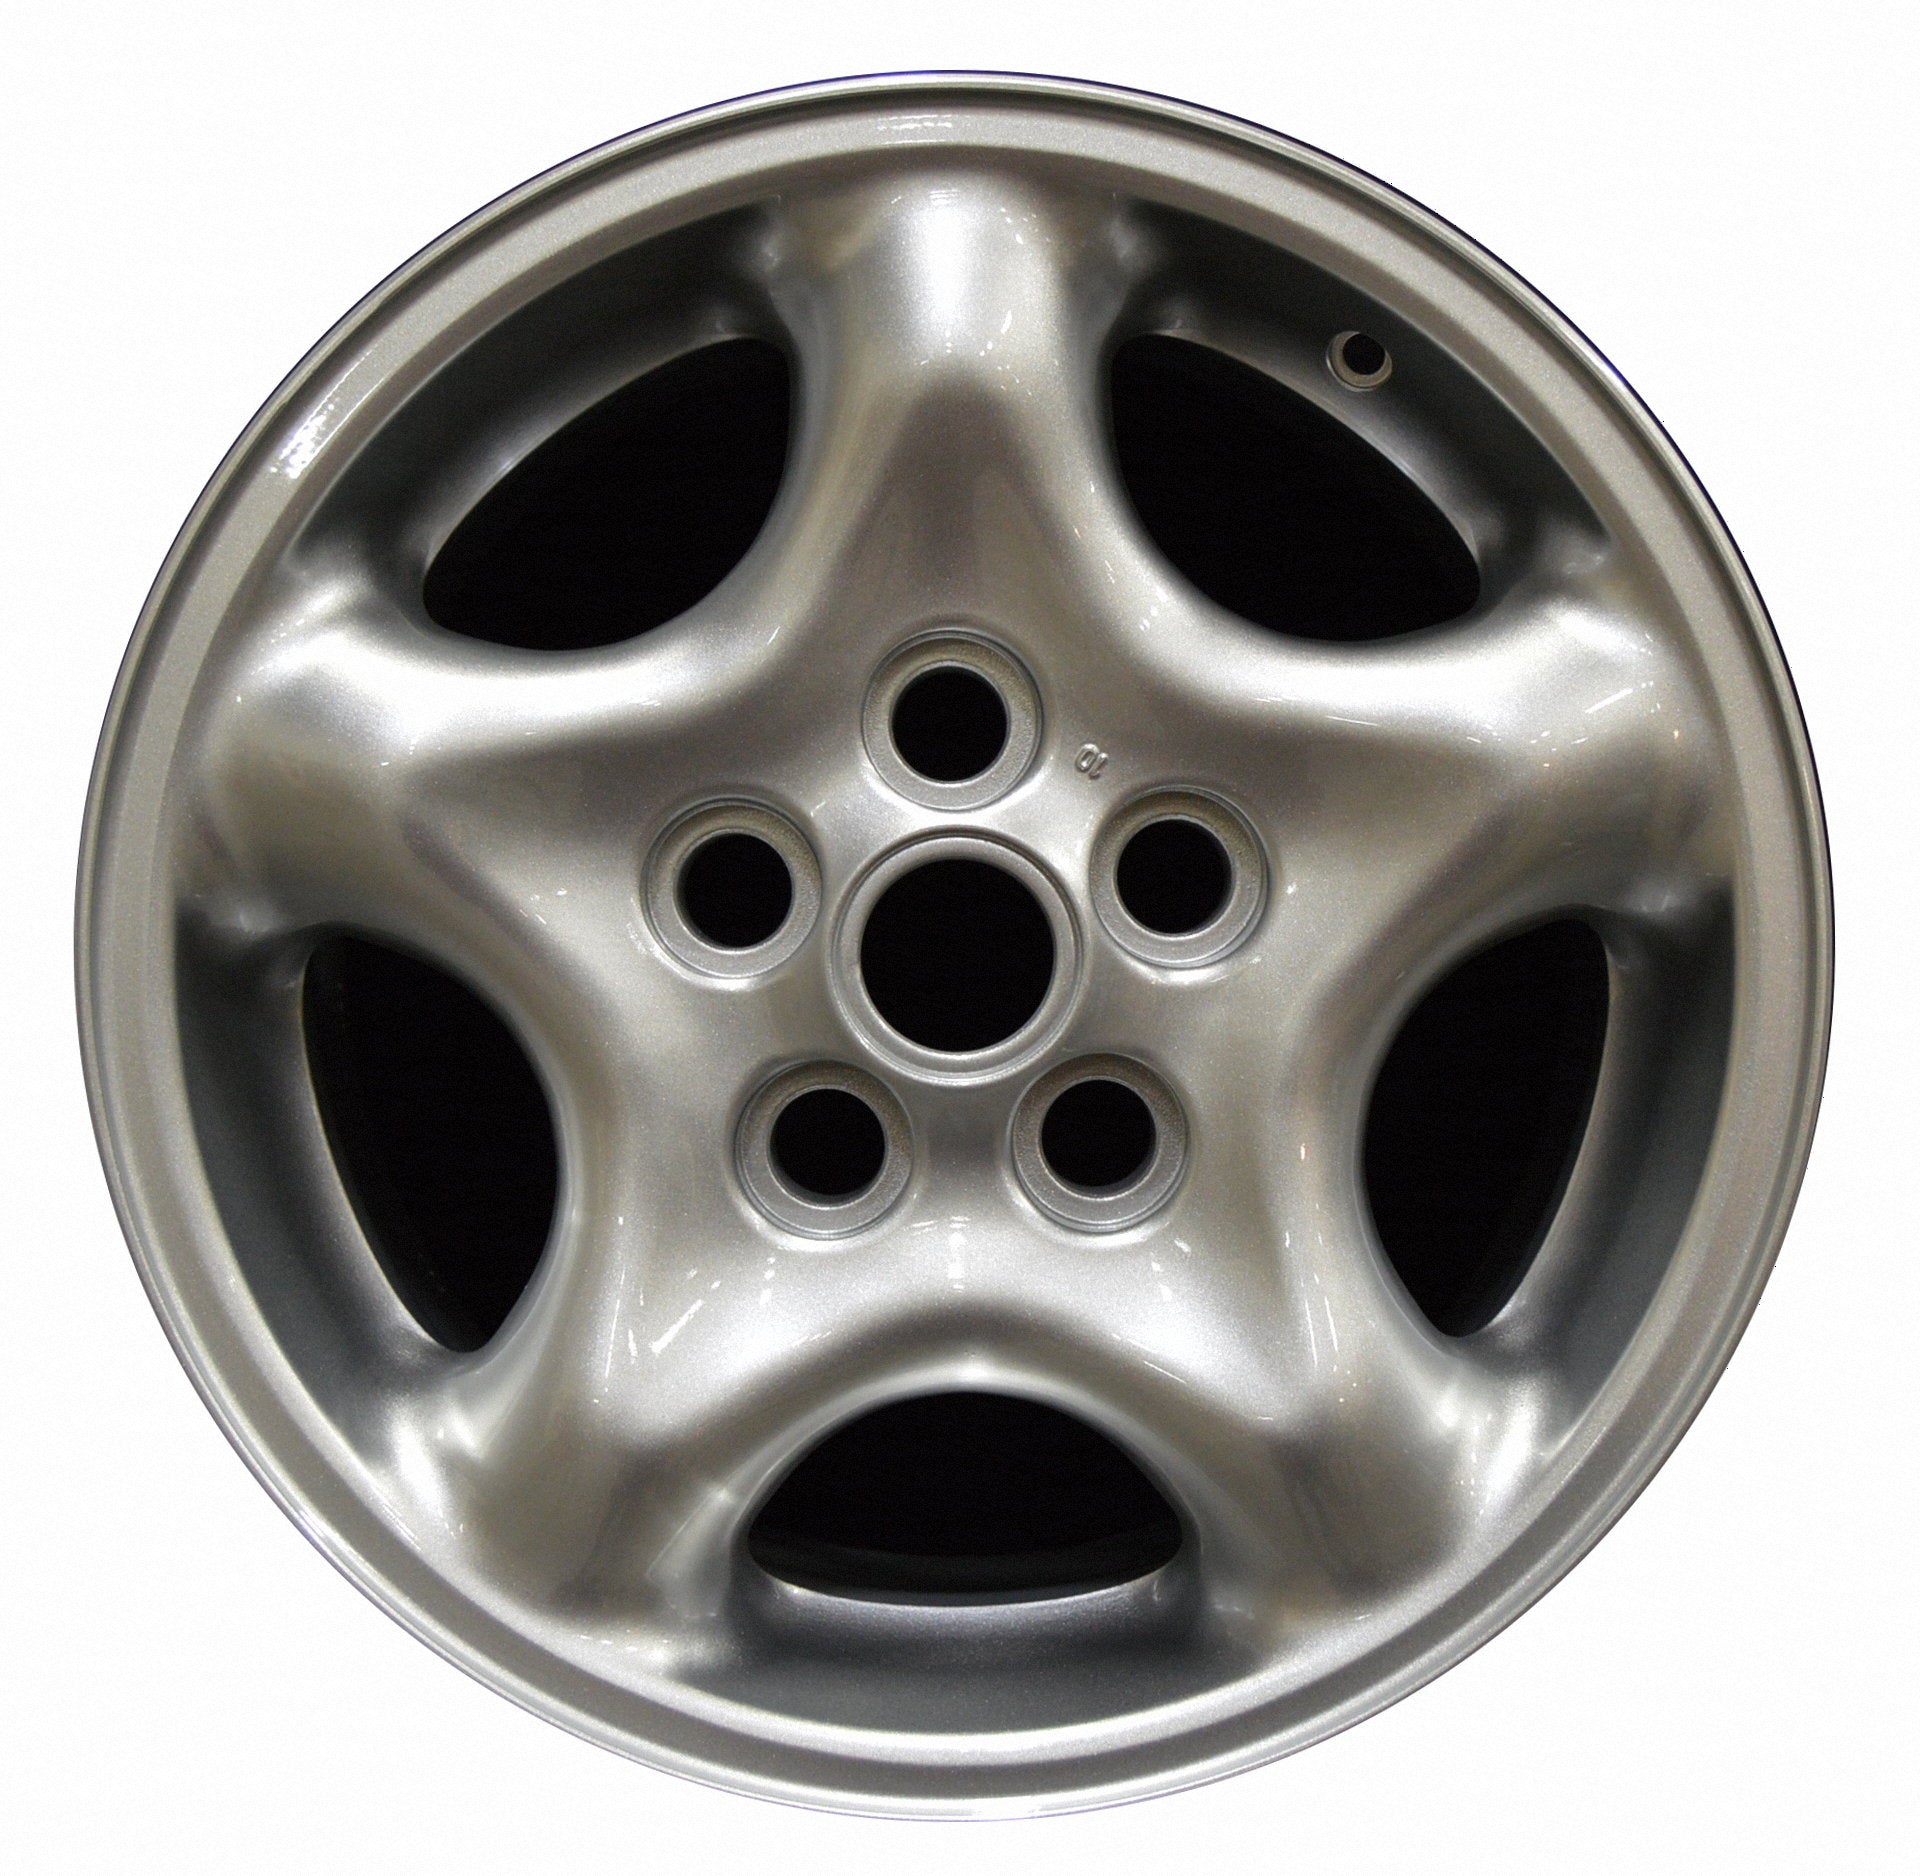 Land Rover Discovery  1999, 2000, 2001, 2002, 2003, 2004 Factory OEM Car Wheel Size 16x8 Alloy WAO.72157.PS08.FF